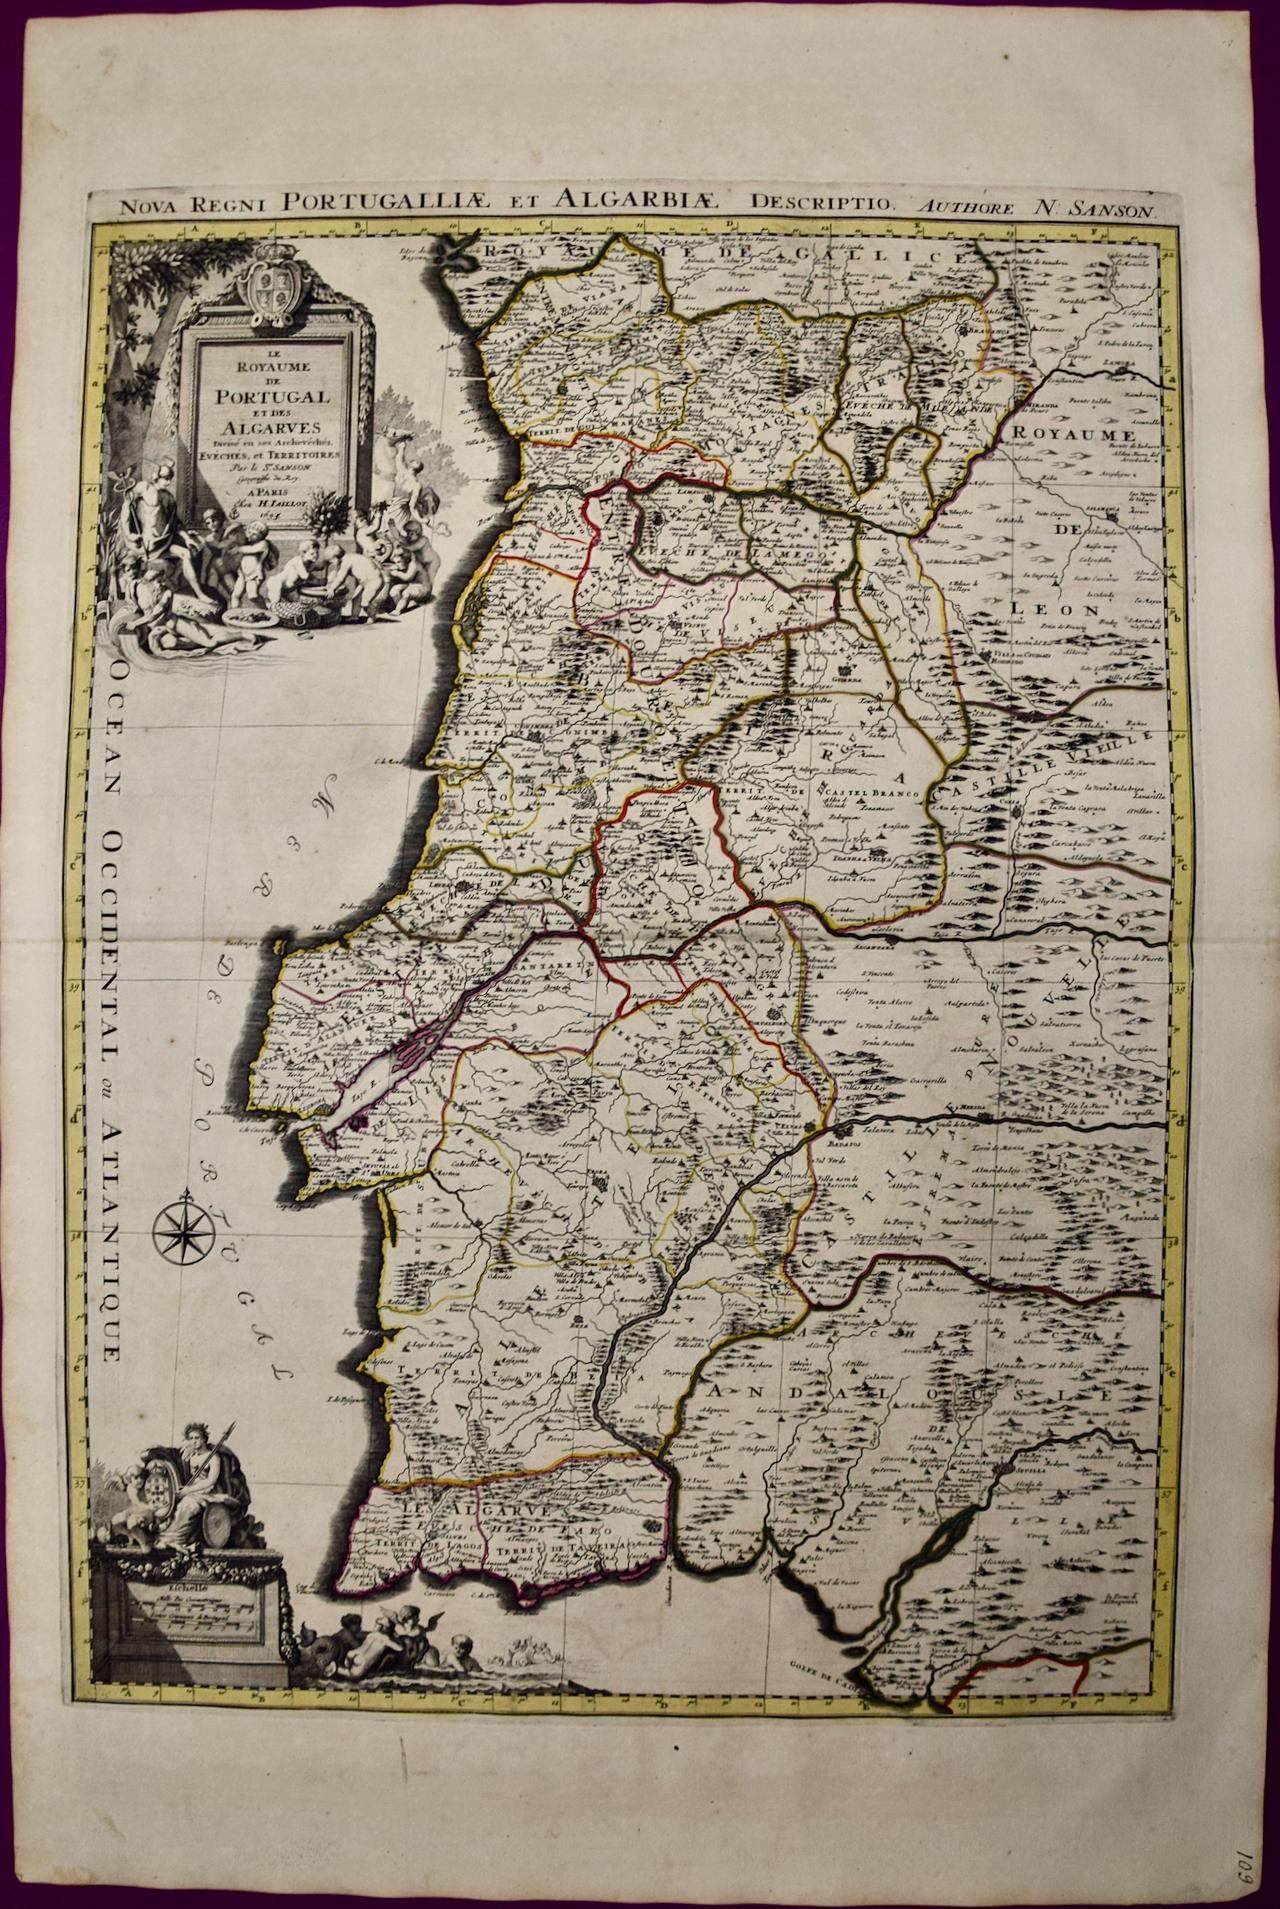 Portugal: A Large 17th Century Hand-colored Map by Sanson and Jaillot